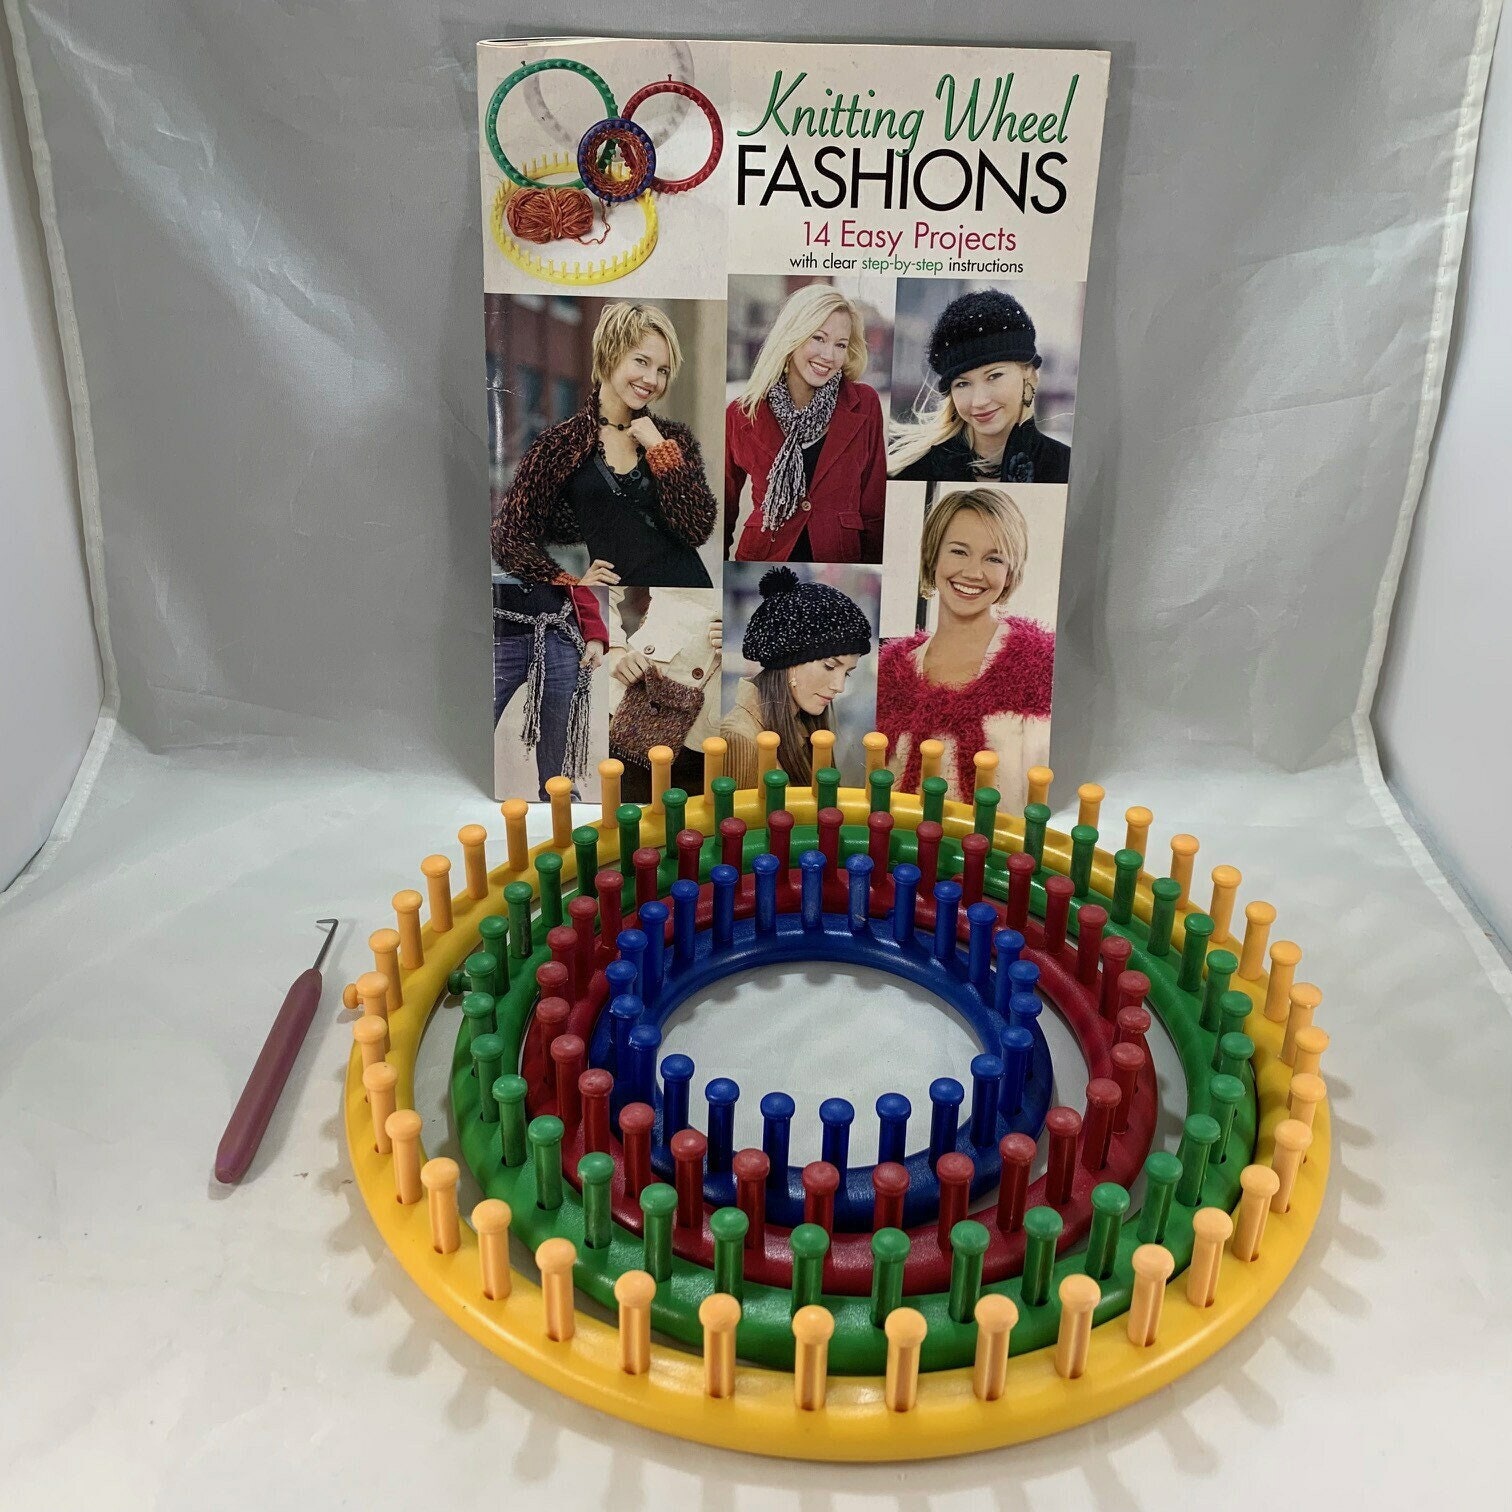 NEW Loops & Threads Knit Quick SOCK LOOM Kit Adjustable Loom Makes Any Size  From Infant to Large Adult, Hook and Instructions Included 